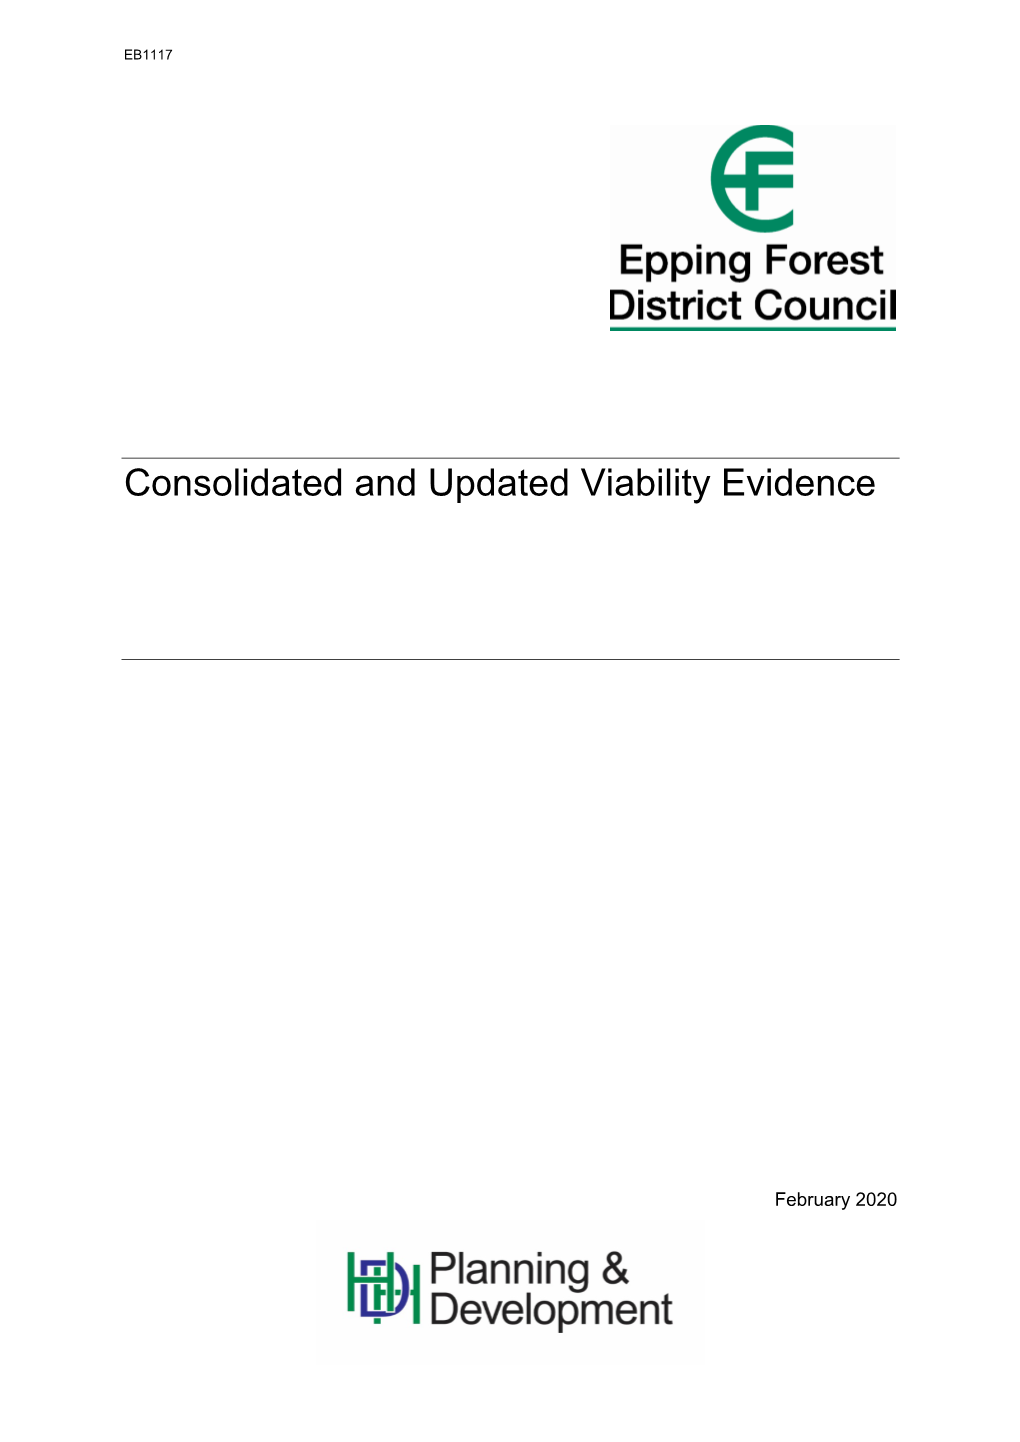 Consolidated and Updated Viability Evidence